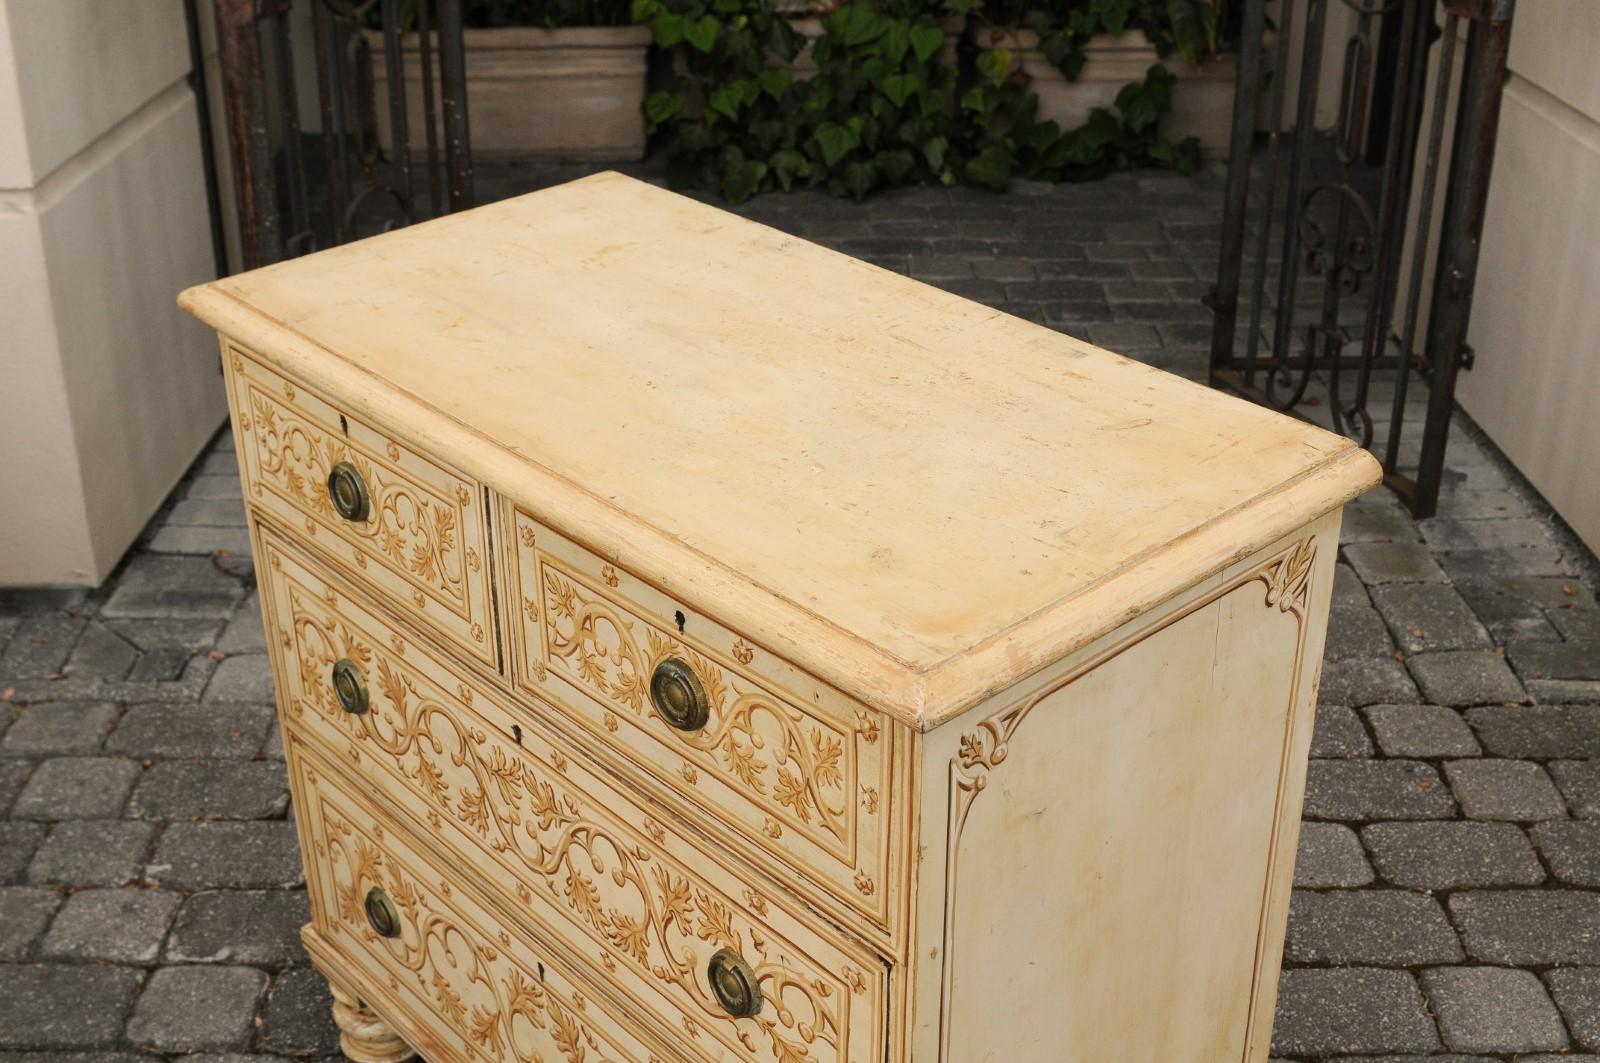 19th Century English Painted Wood Four-Drawer Commode with Scrollwork Motifs, circa 1880 For Sale